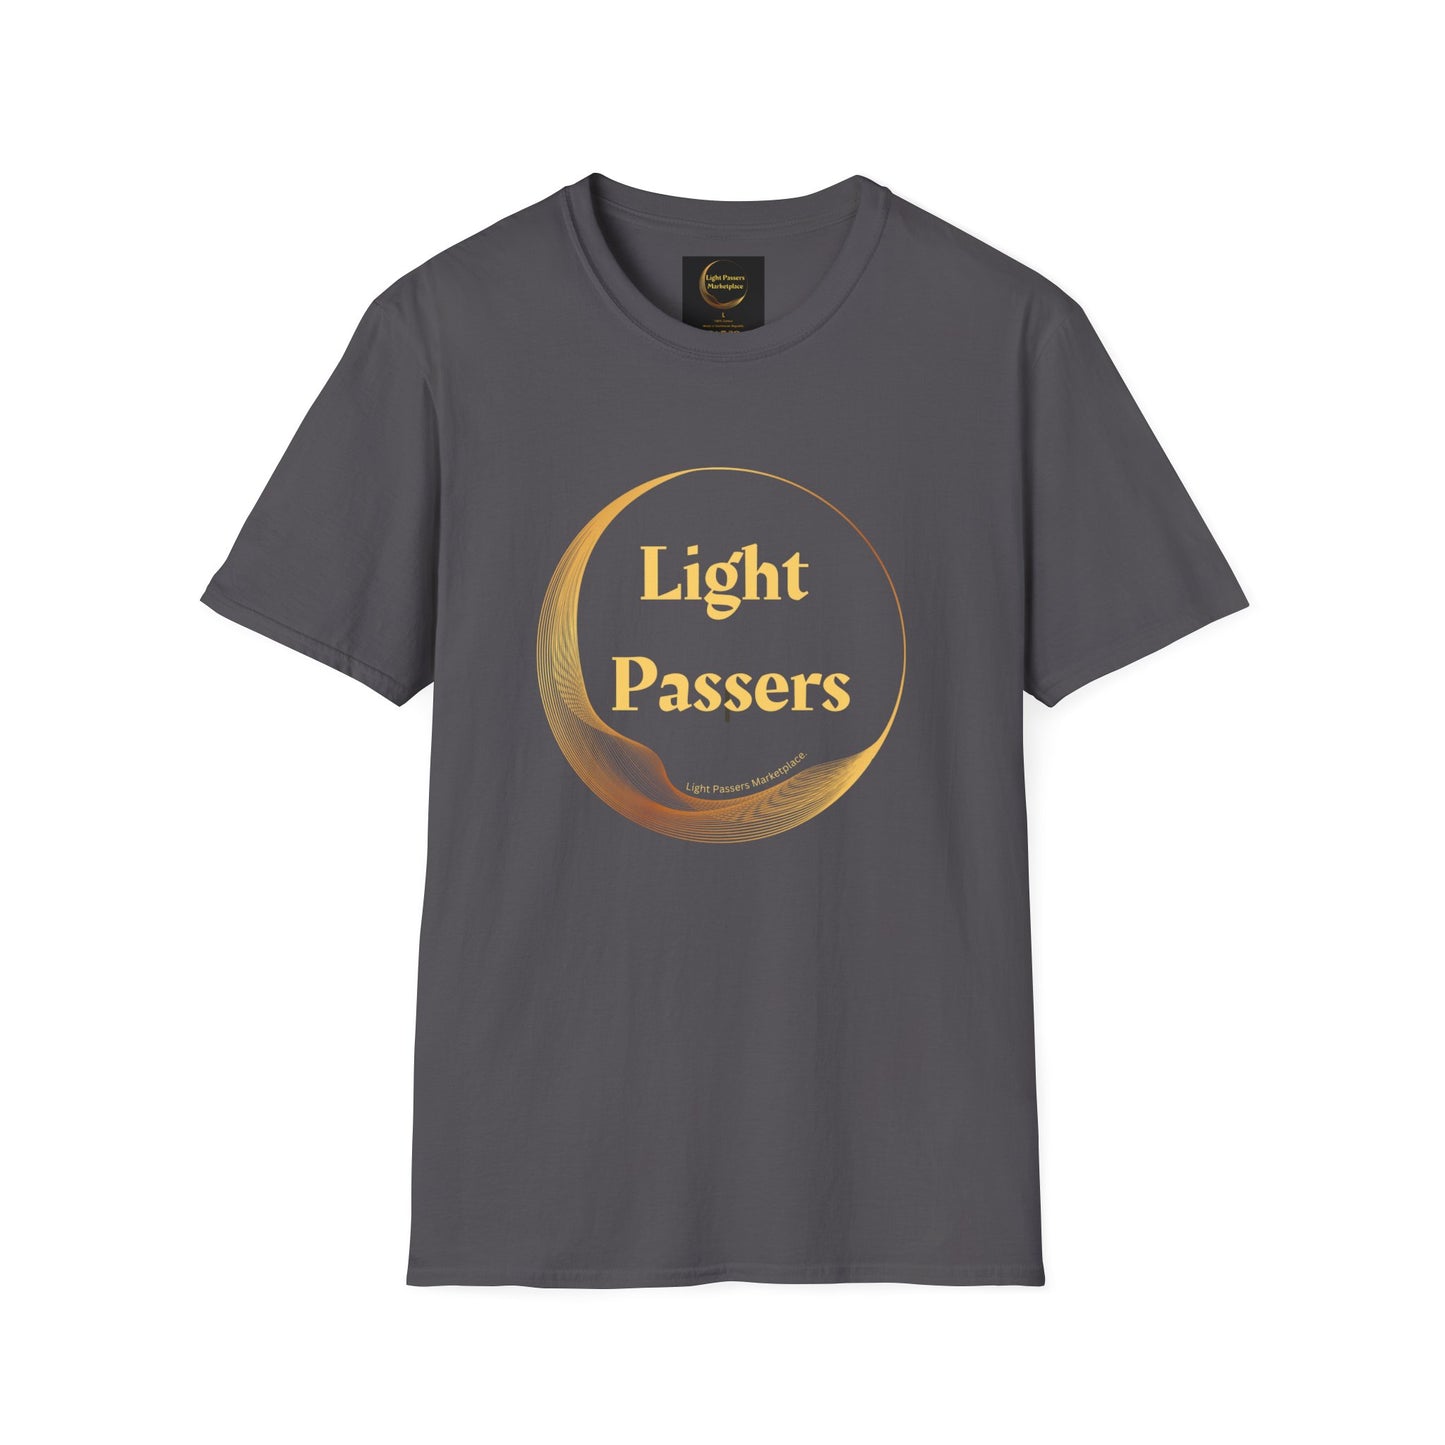 A grey unisex t-shirt featuring a gold logo and text, emphasizing premium printing quality and comfort with no side seams or itchy interruptions. Classic fit, 100% cotton.